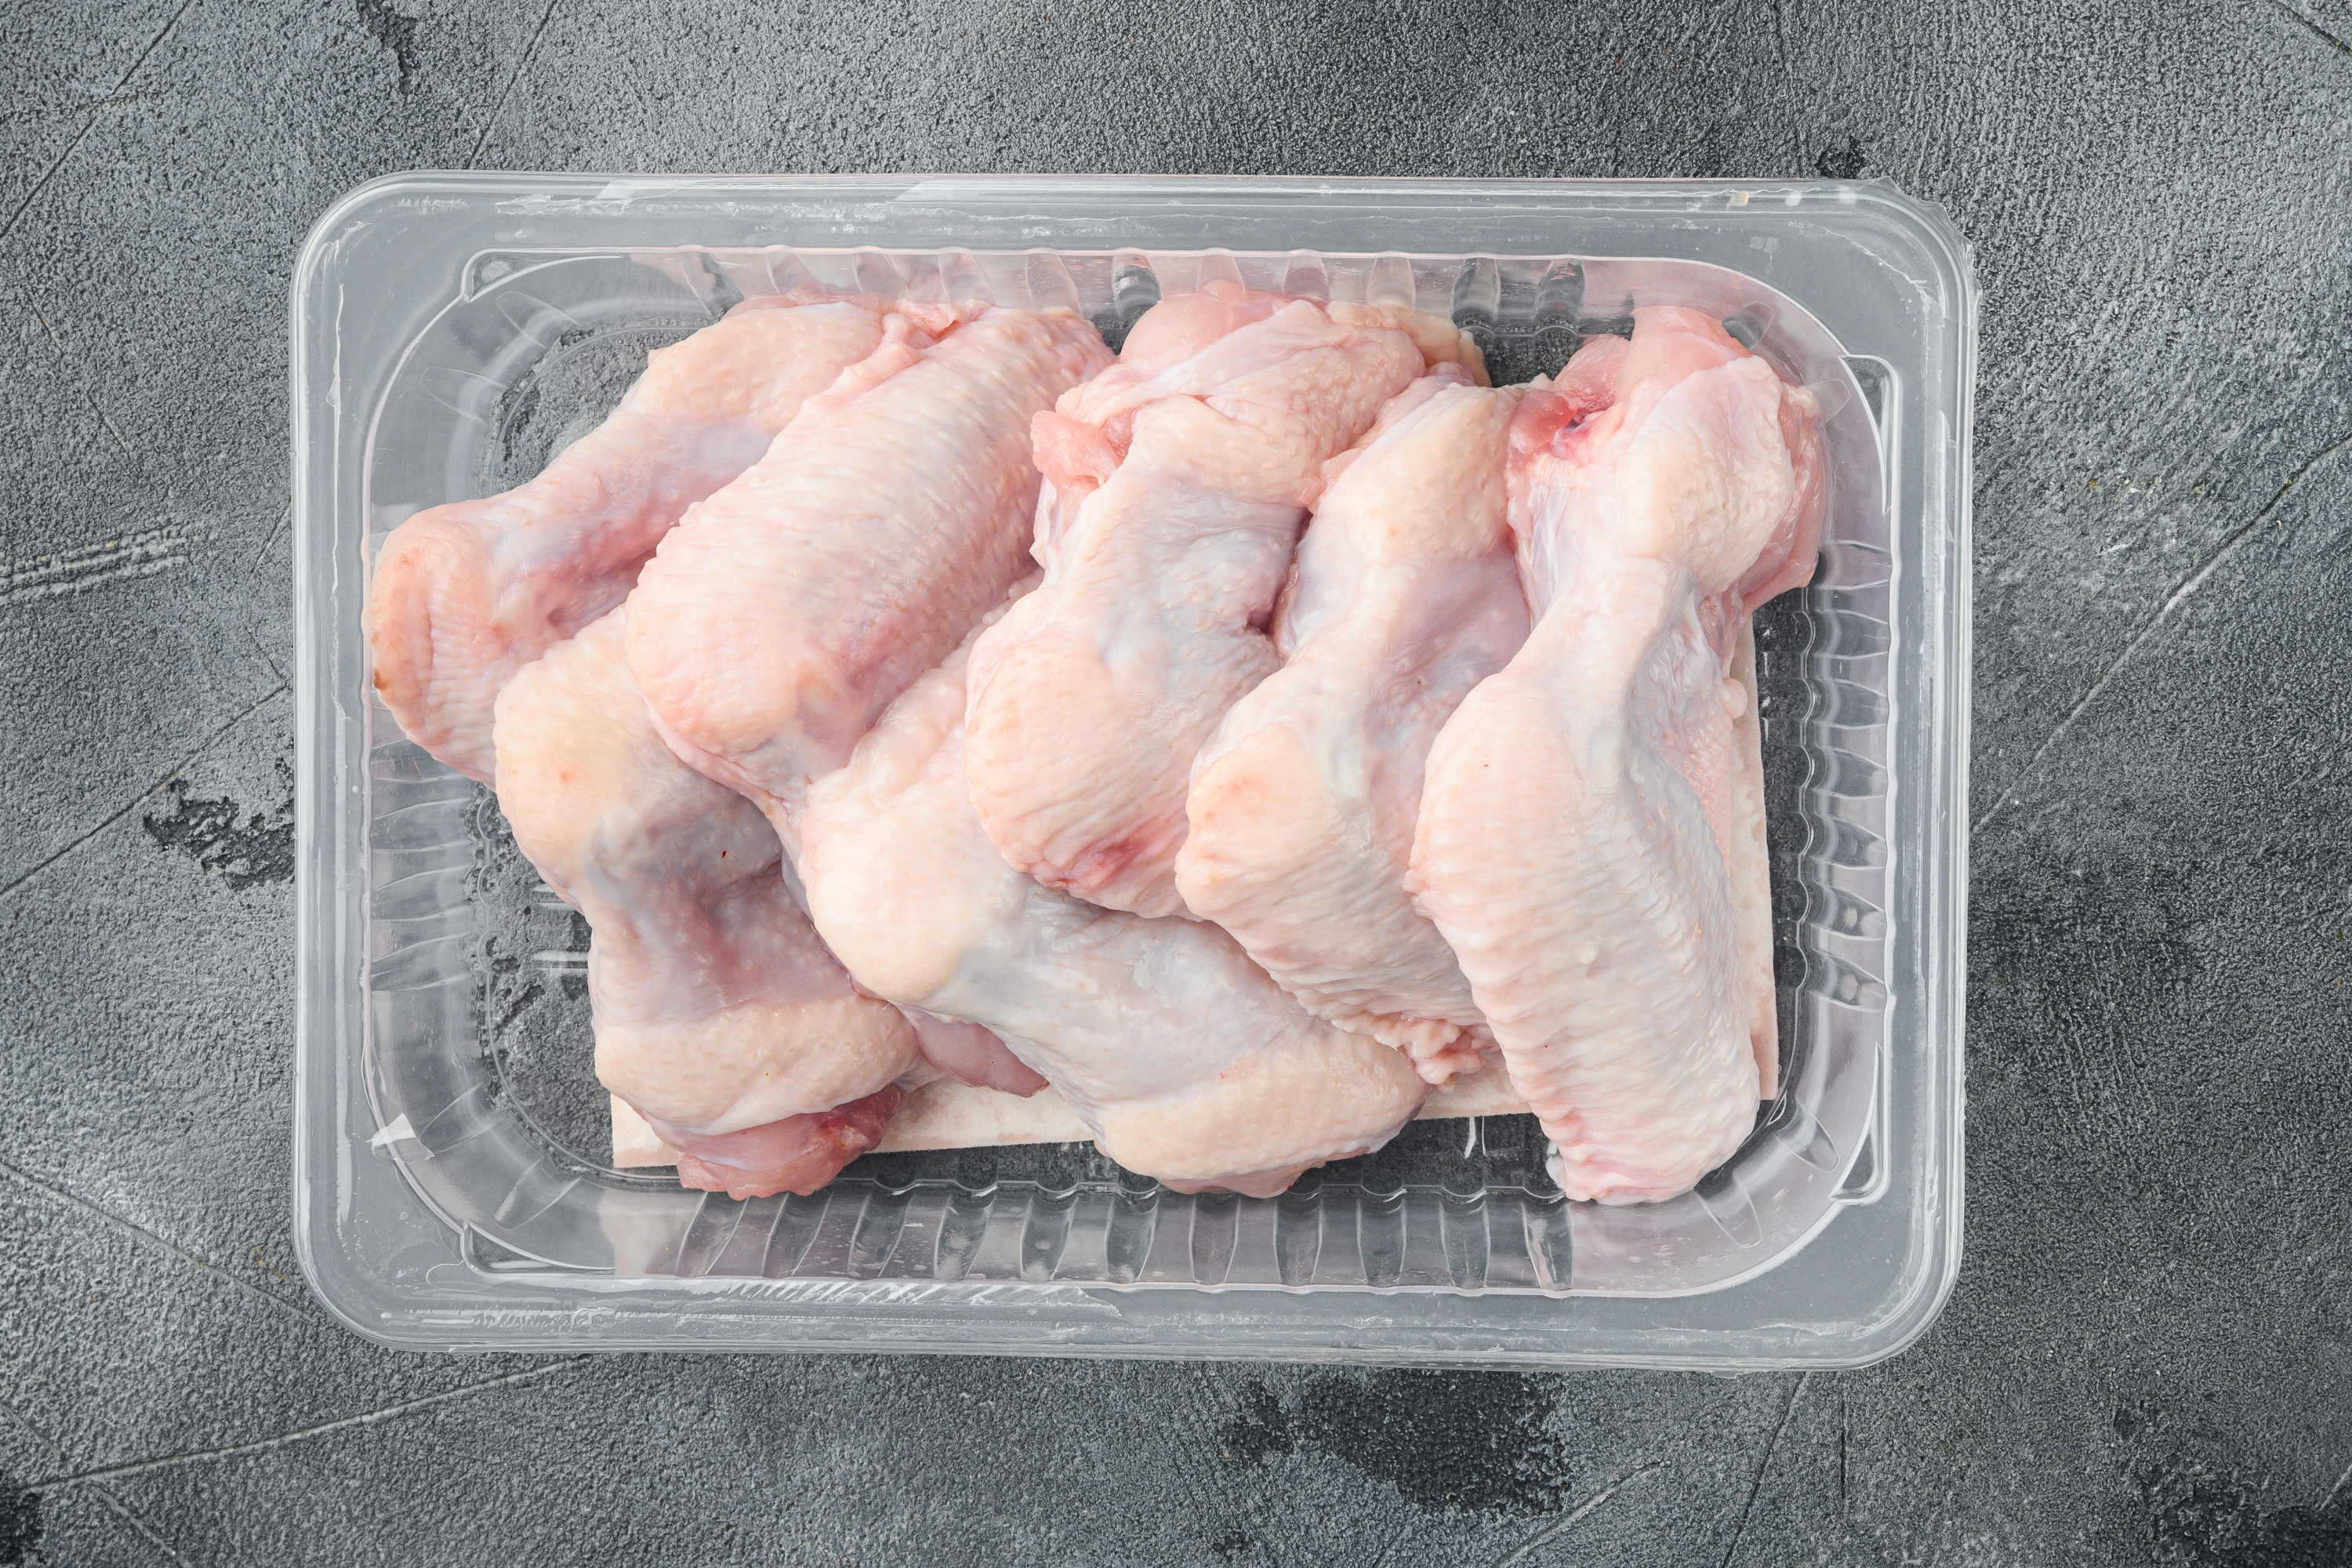 A package of raw chicken.